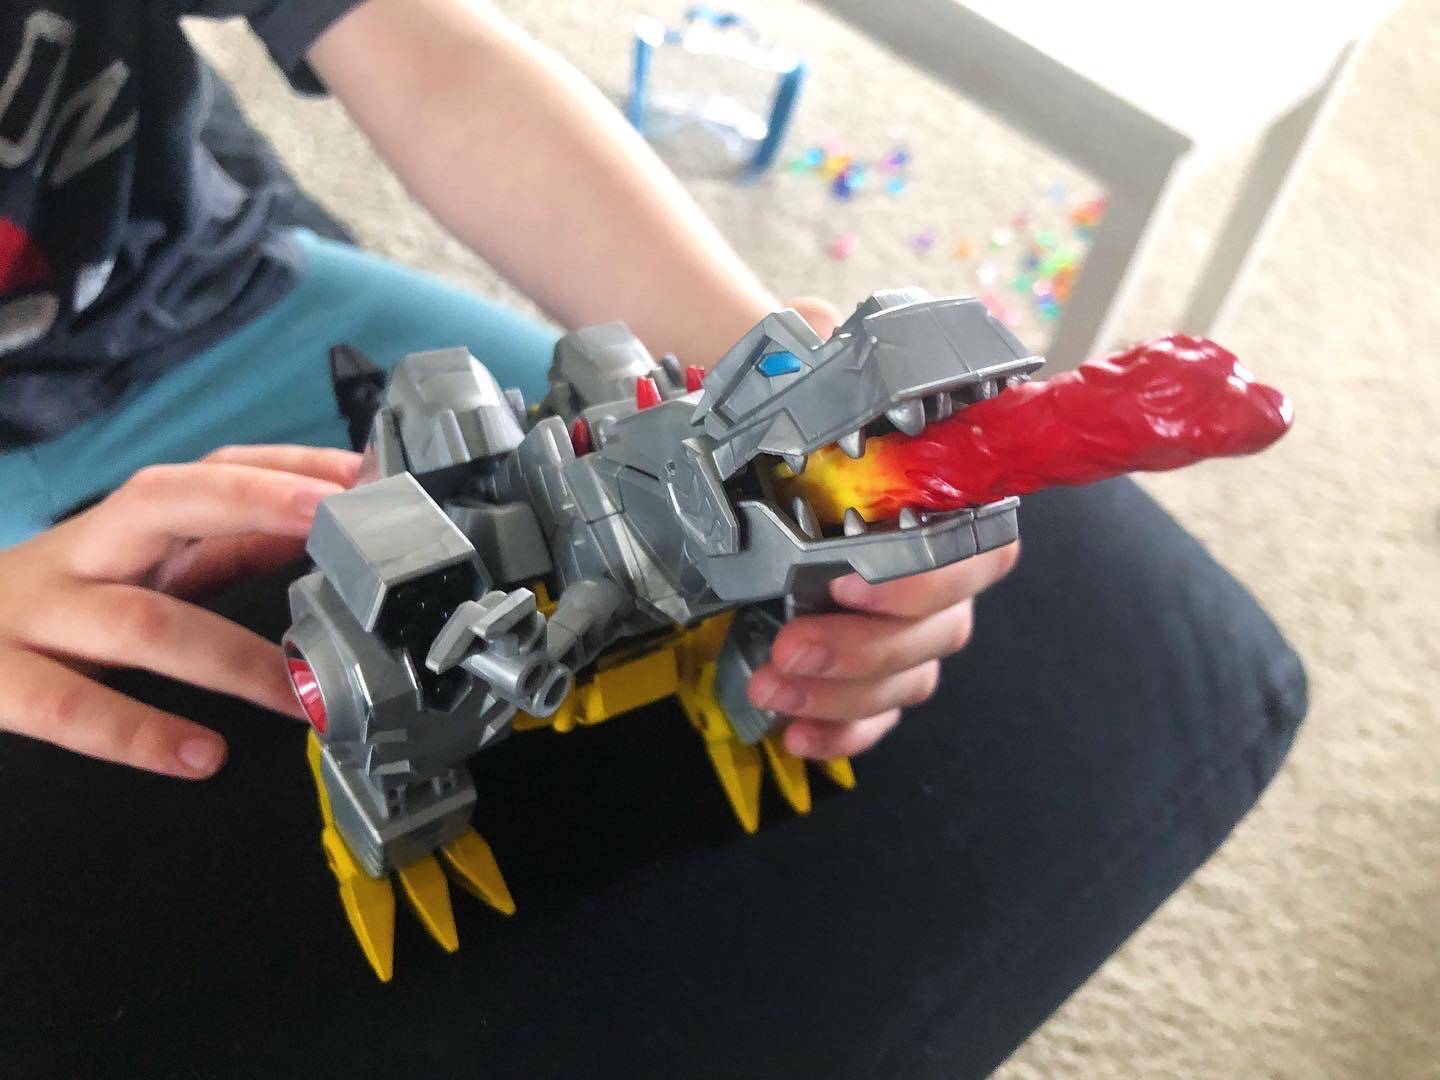 A gray, plastic dragon transformer toy is being played with by a child on a black couch. Only the child's hands are visible. Photo by Alyssa Buckley.